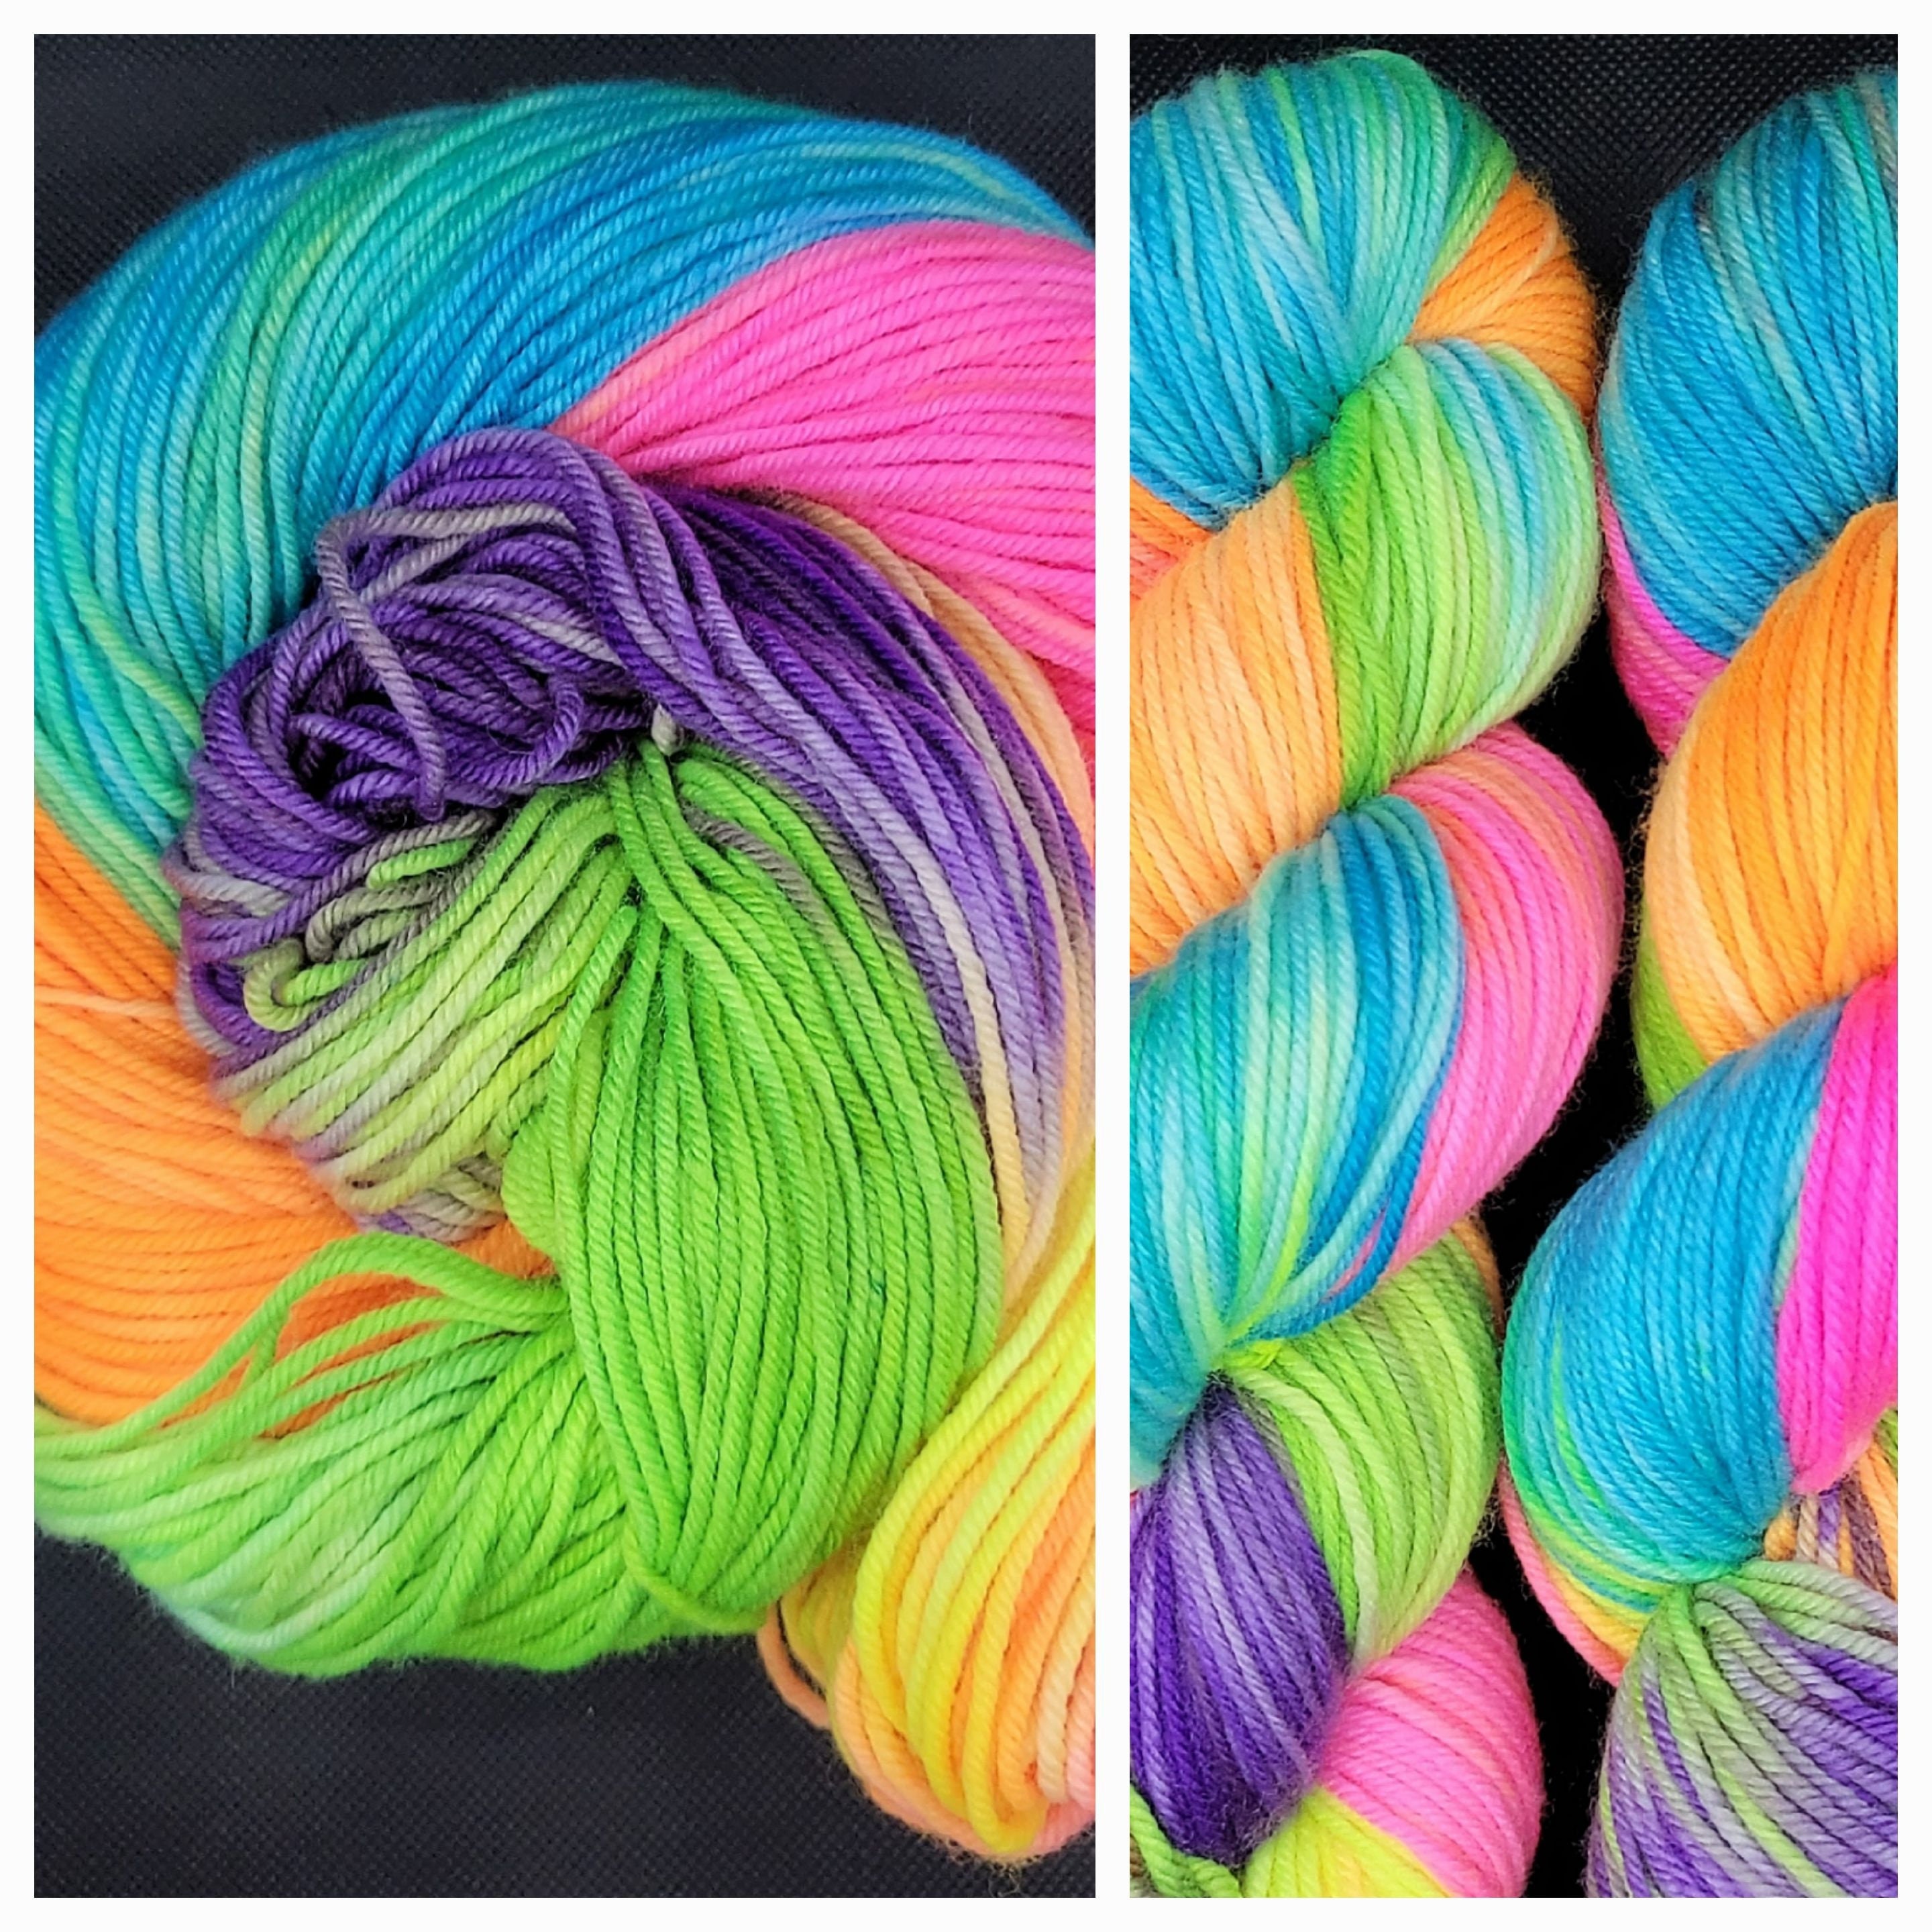 Worsted Weight Yarn, Hand Dyed, Speckled, Superwash Merino, Neon Rainbow  Speckled Yarn, Hand Dyed Yarn 100 G/218 Yds, Worsted Yarn Voila 